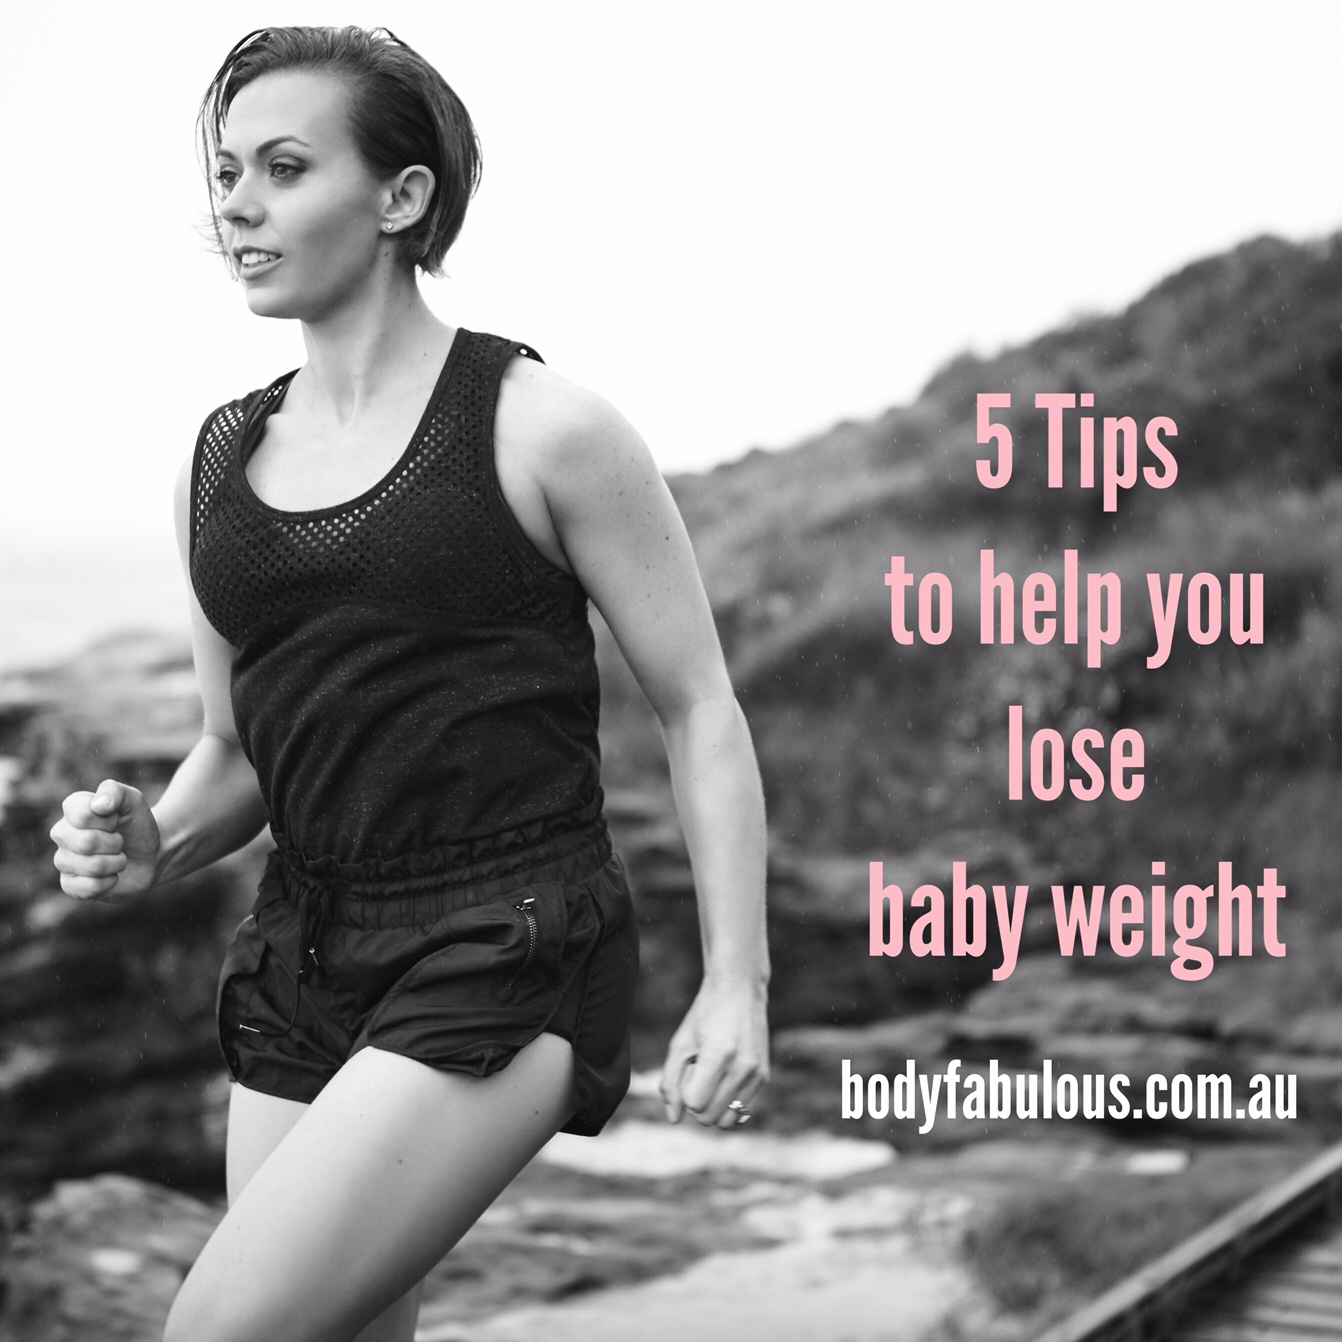 Lose Baby Weight - effectively